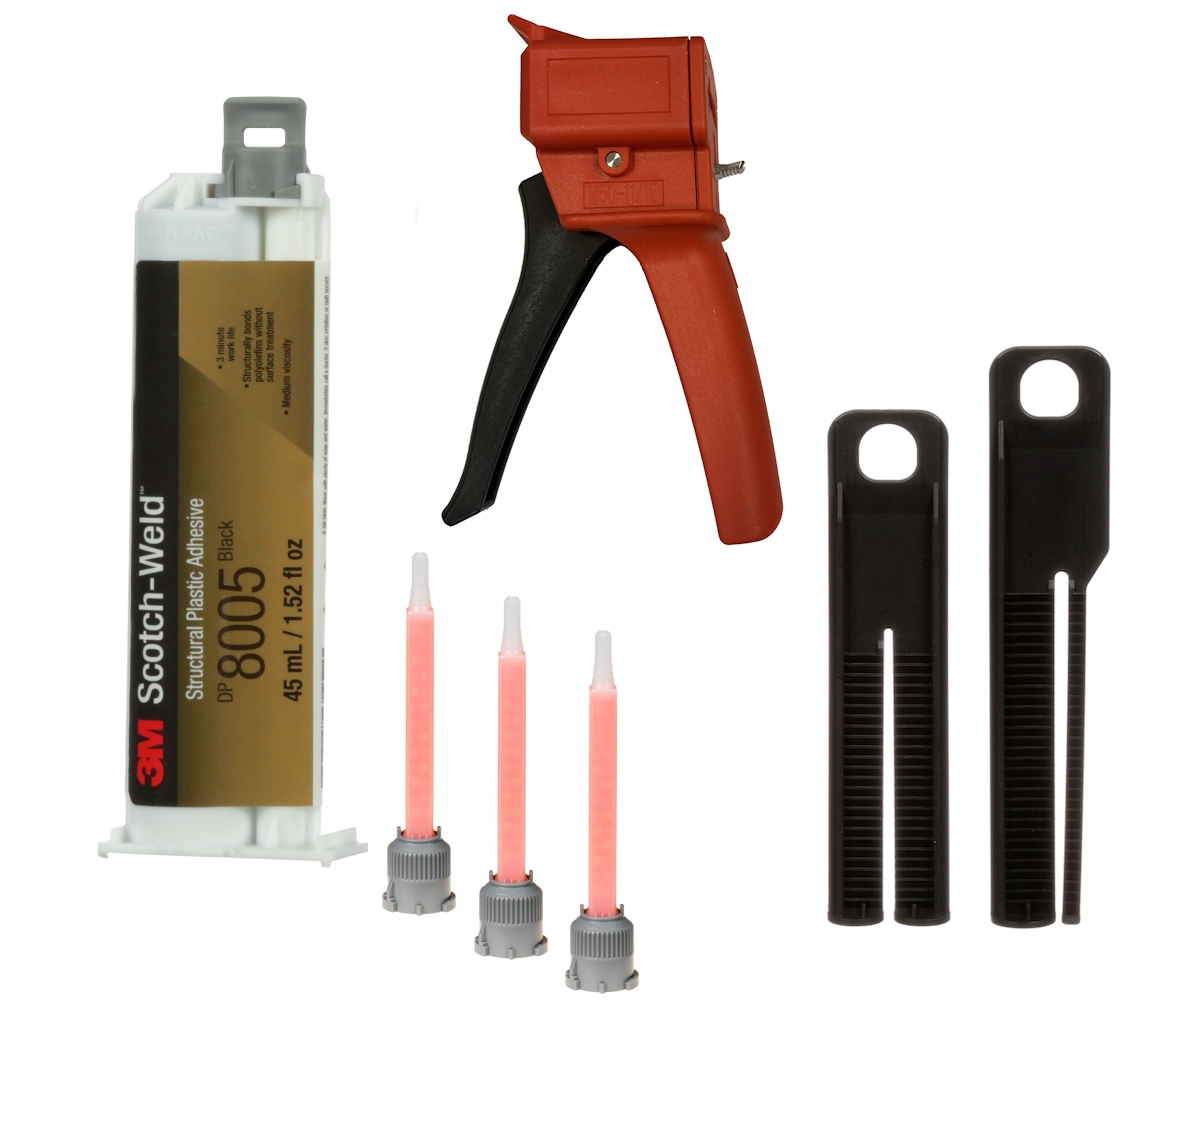 Starter Set: 1x 3M Scotch-Weld 2-component construction adhesive EPX System DP8005, beige, 45ml 1x S-K-S hand tool for EPX 38 to 50ml cartridges incl. feed piston 2:1